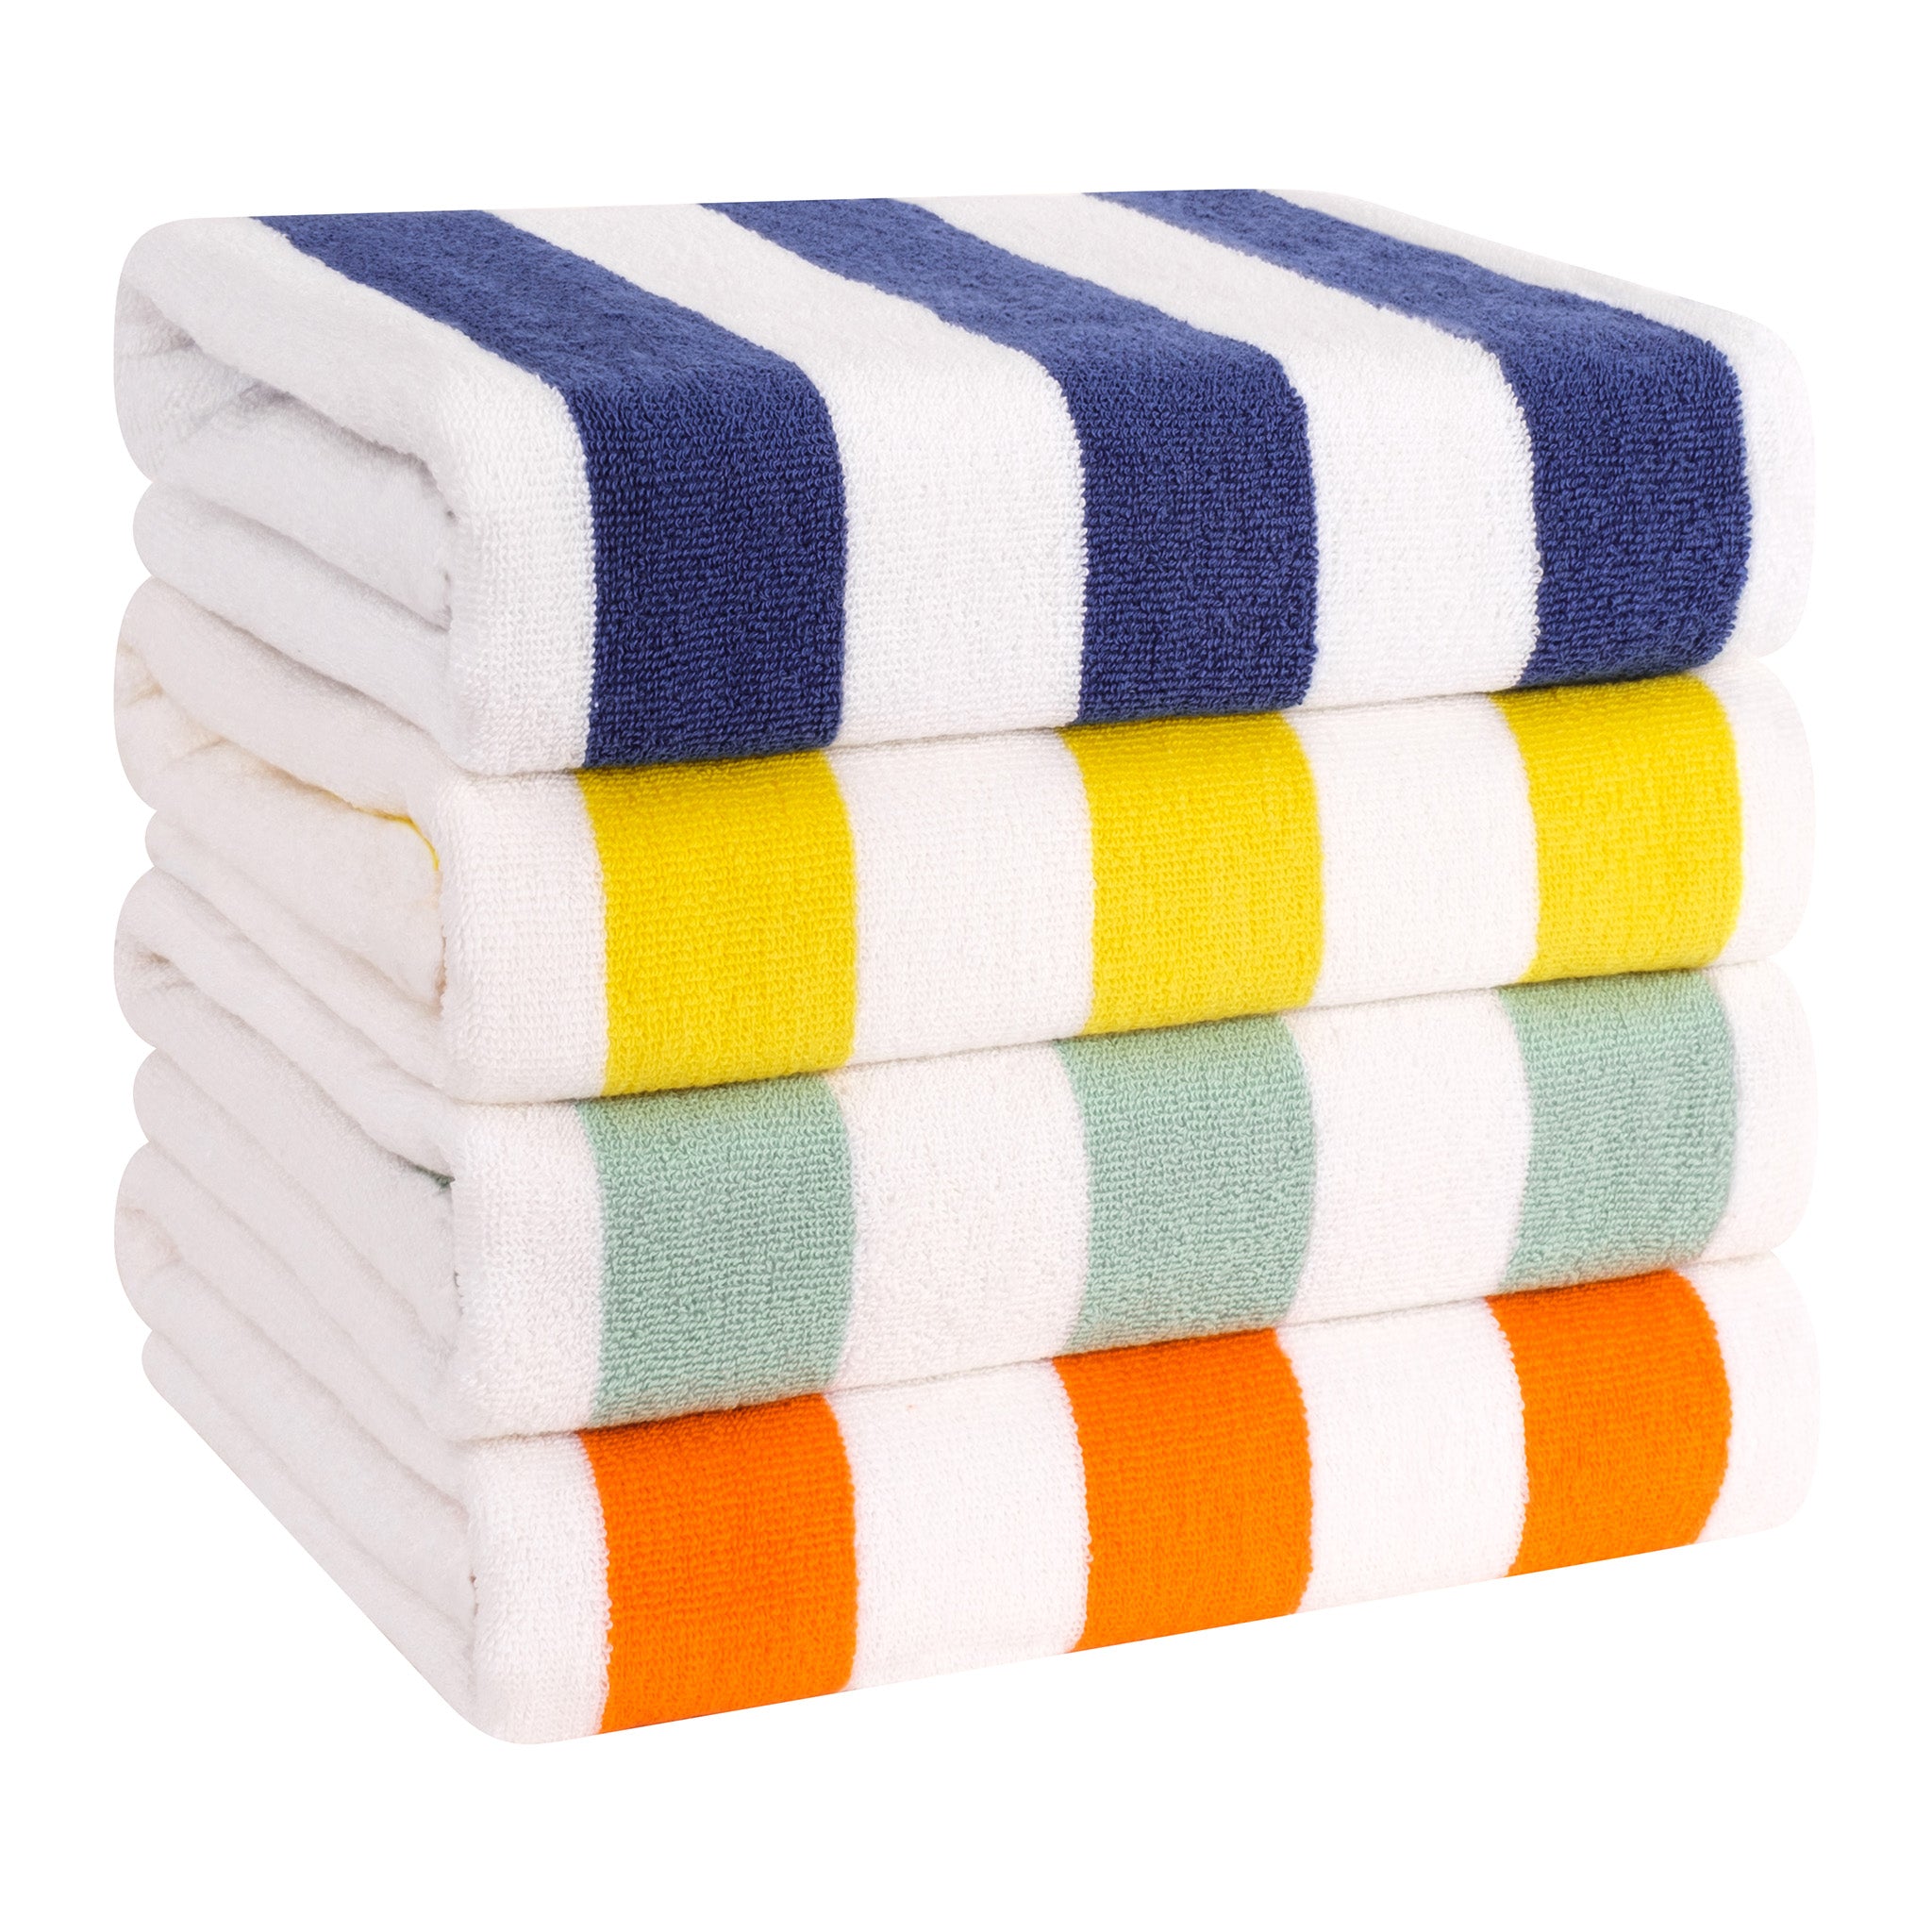 American Soft Linen 100% Cotton 4 Pack Beach Towels Cabana Striped Pool Towels -mix-1